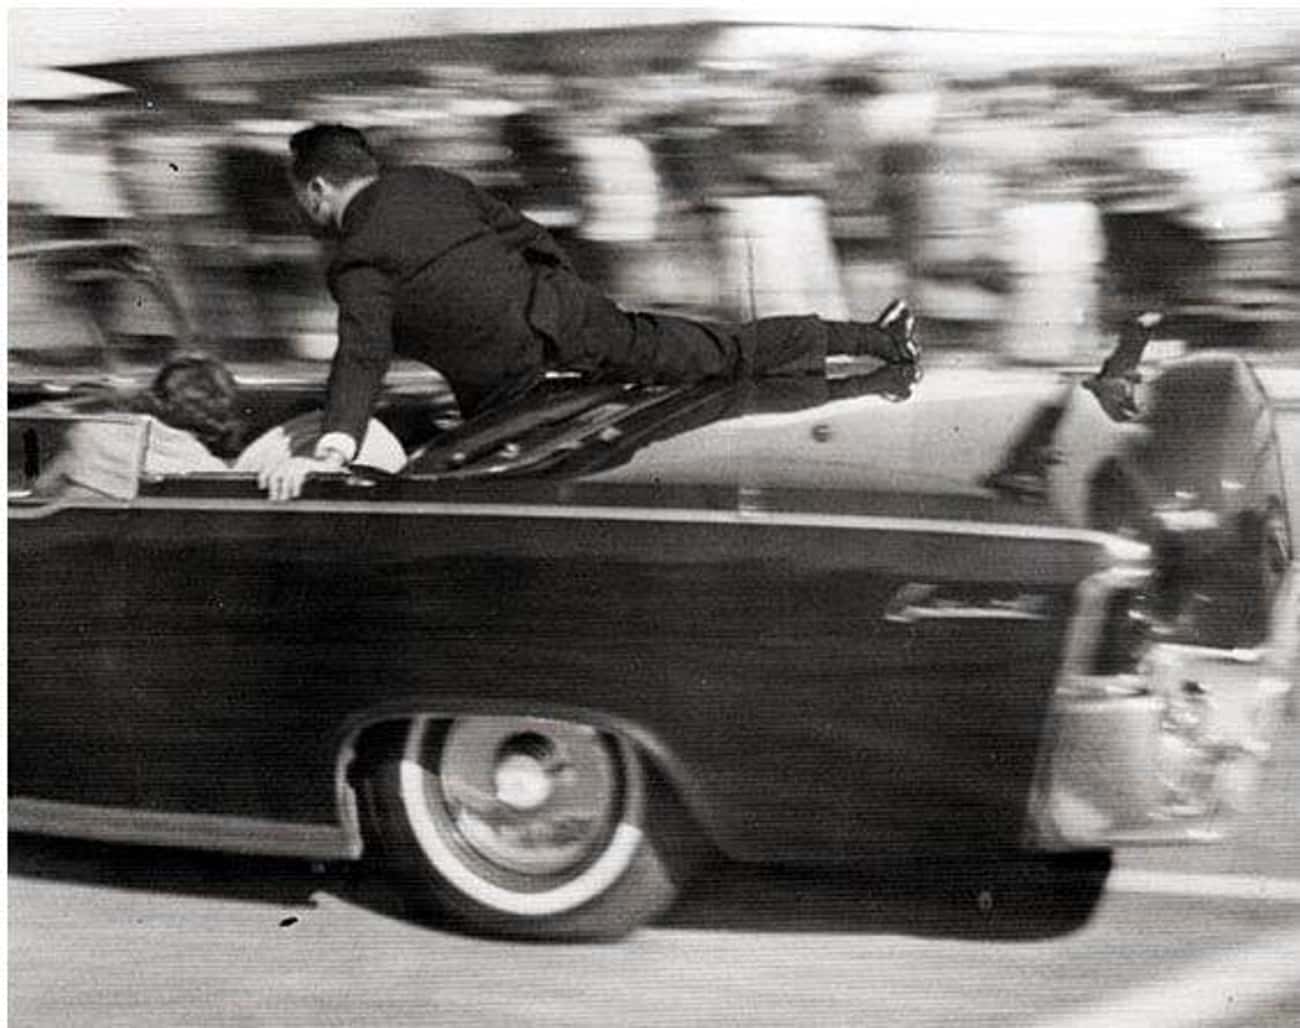 After The Shot, Jackie Kennedy Attempted To Flee The Limousine